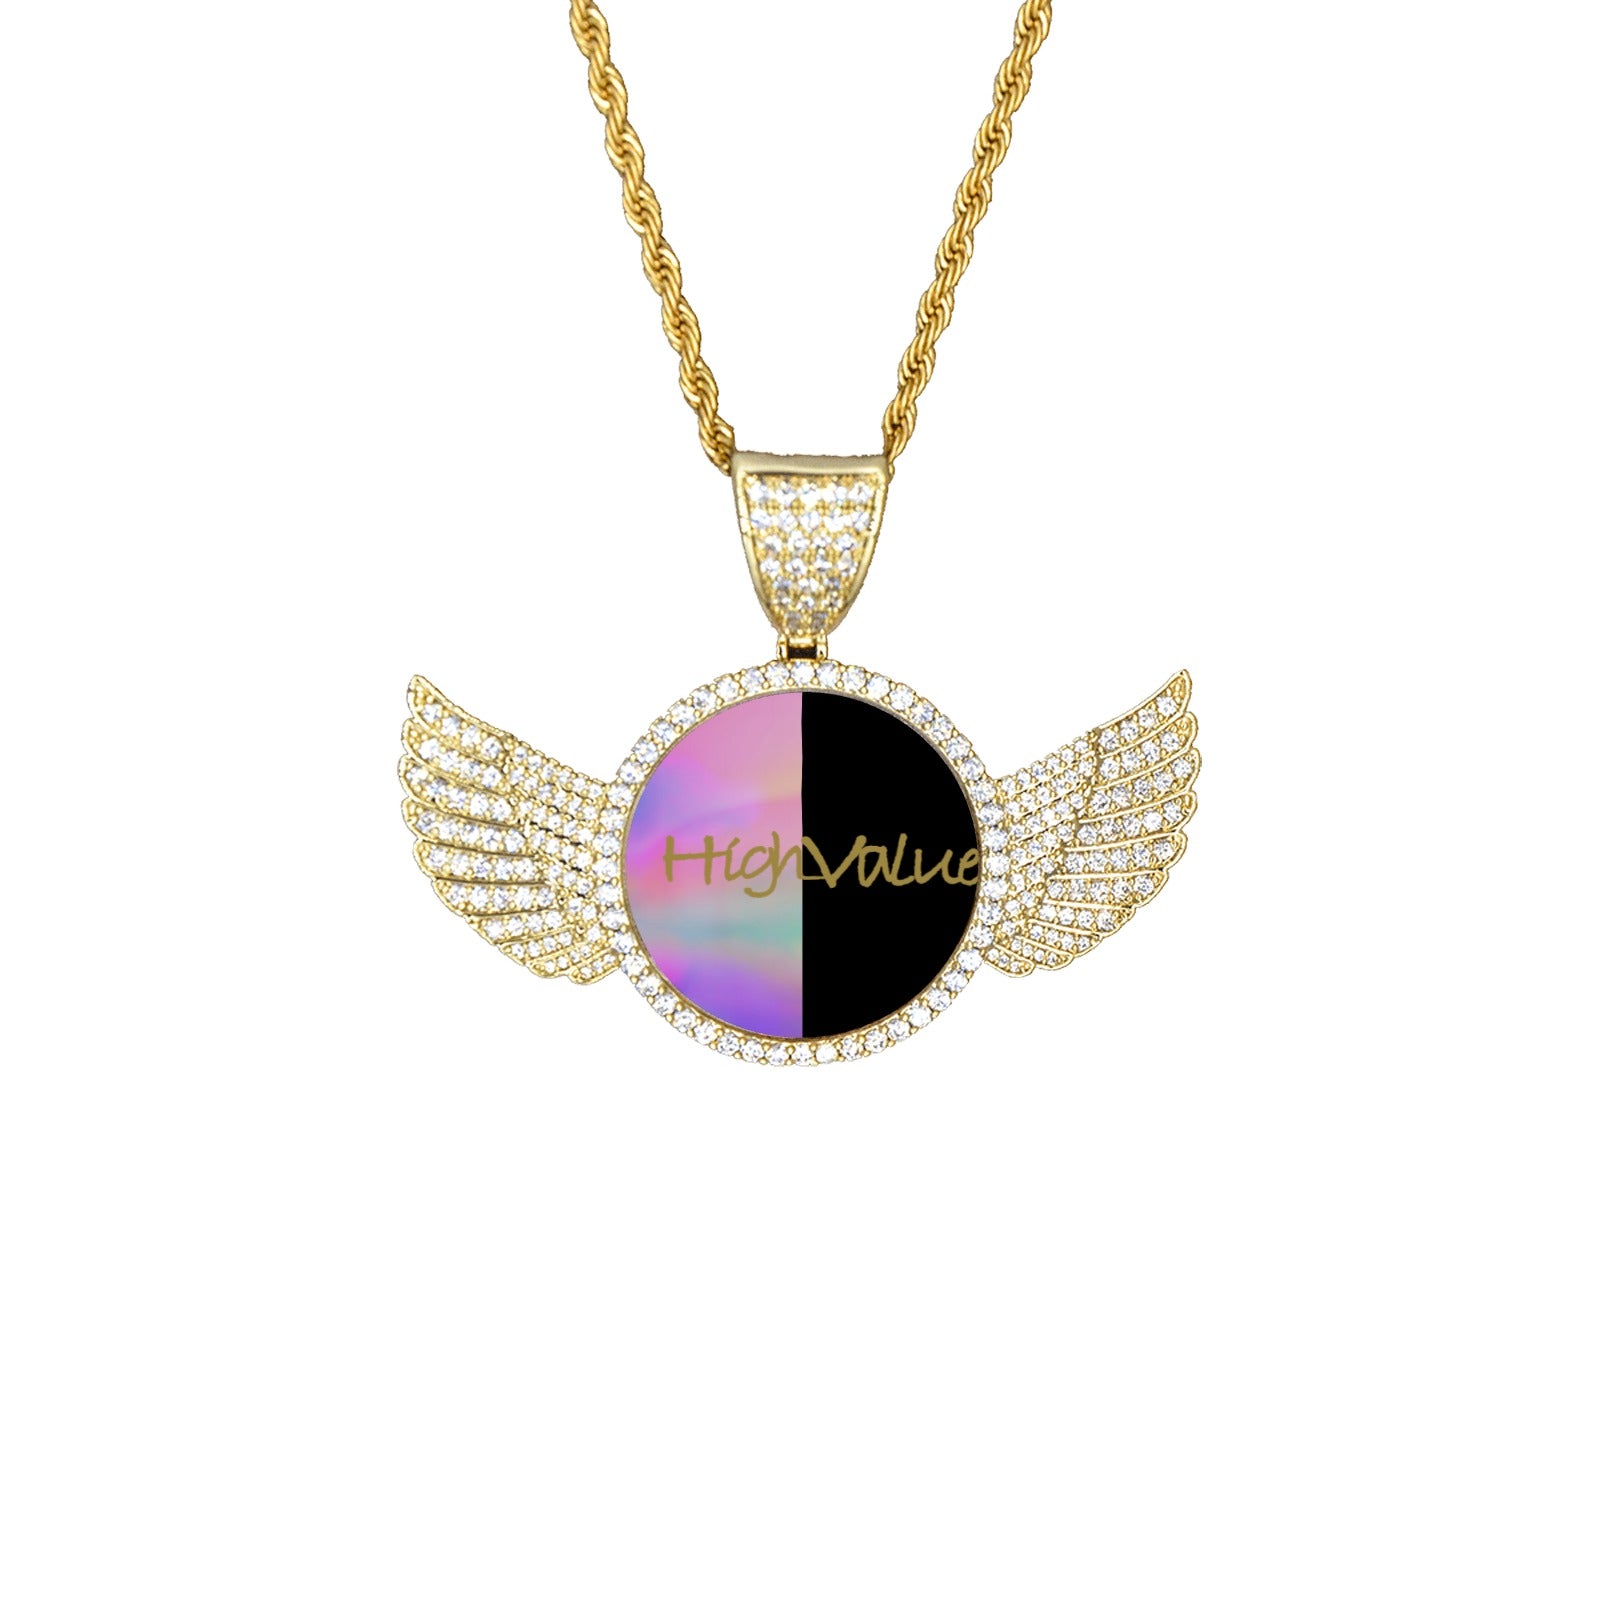 High Value Wings Bling Pendant with Rope Chain Necklace Gold Edition